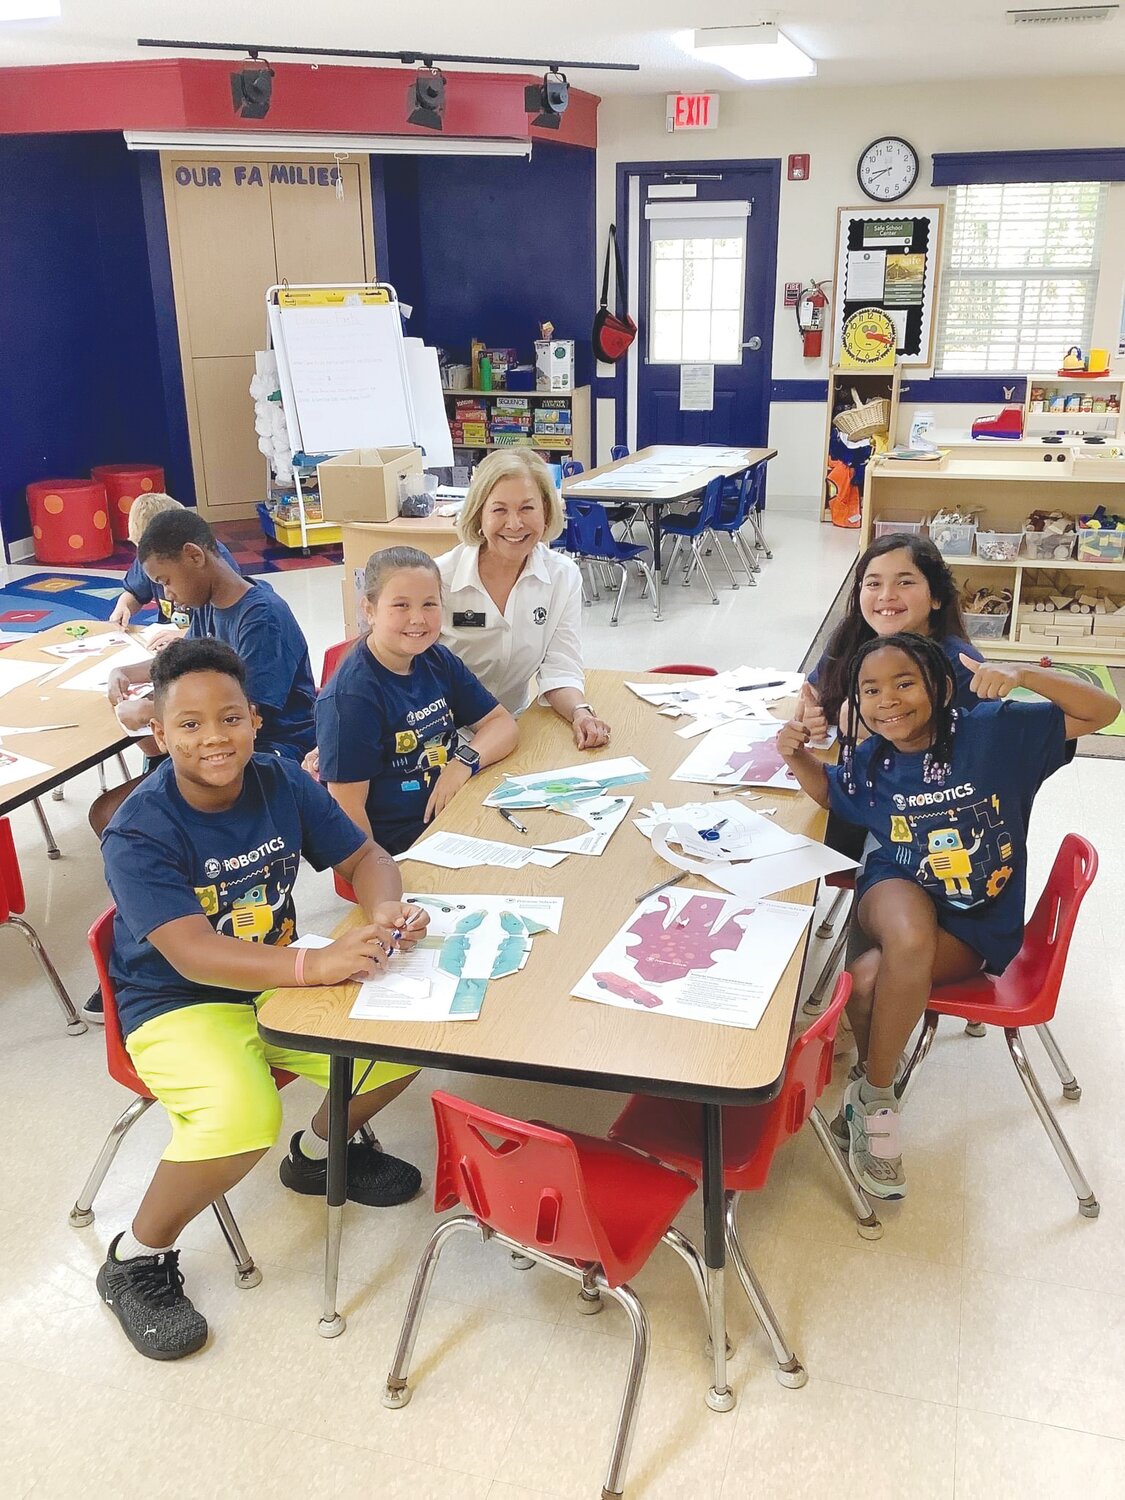 Primrose School of Fleming Island students turned their skills and attention to robotics to finish third place at the “Ready, Set, Robotics” competition. The group then donated their $1,000 prize to Safe Animal Shelter.